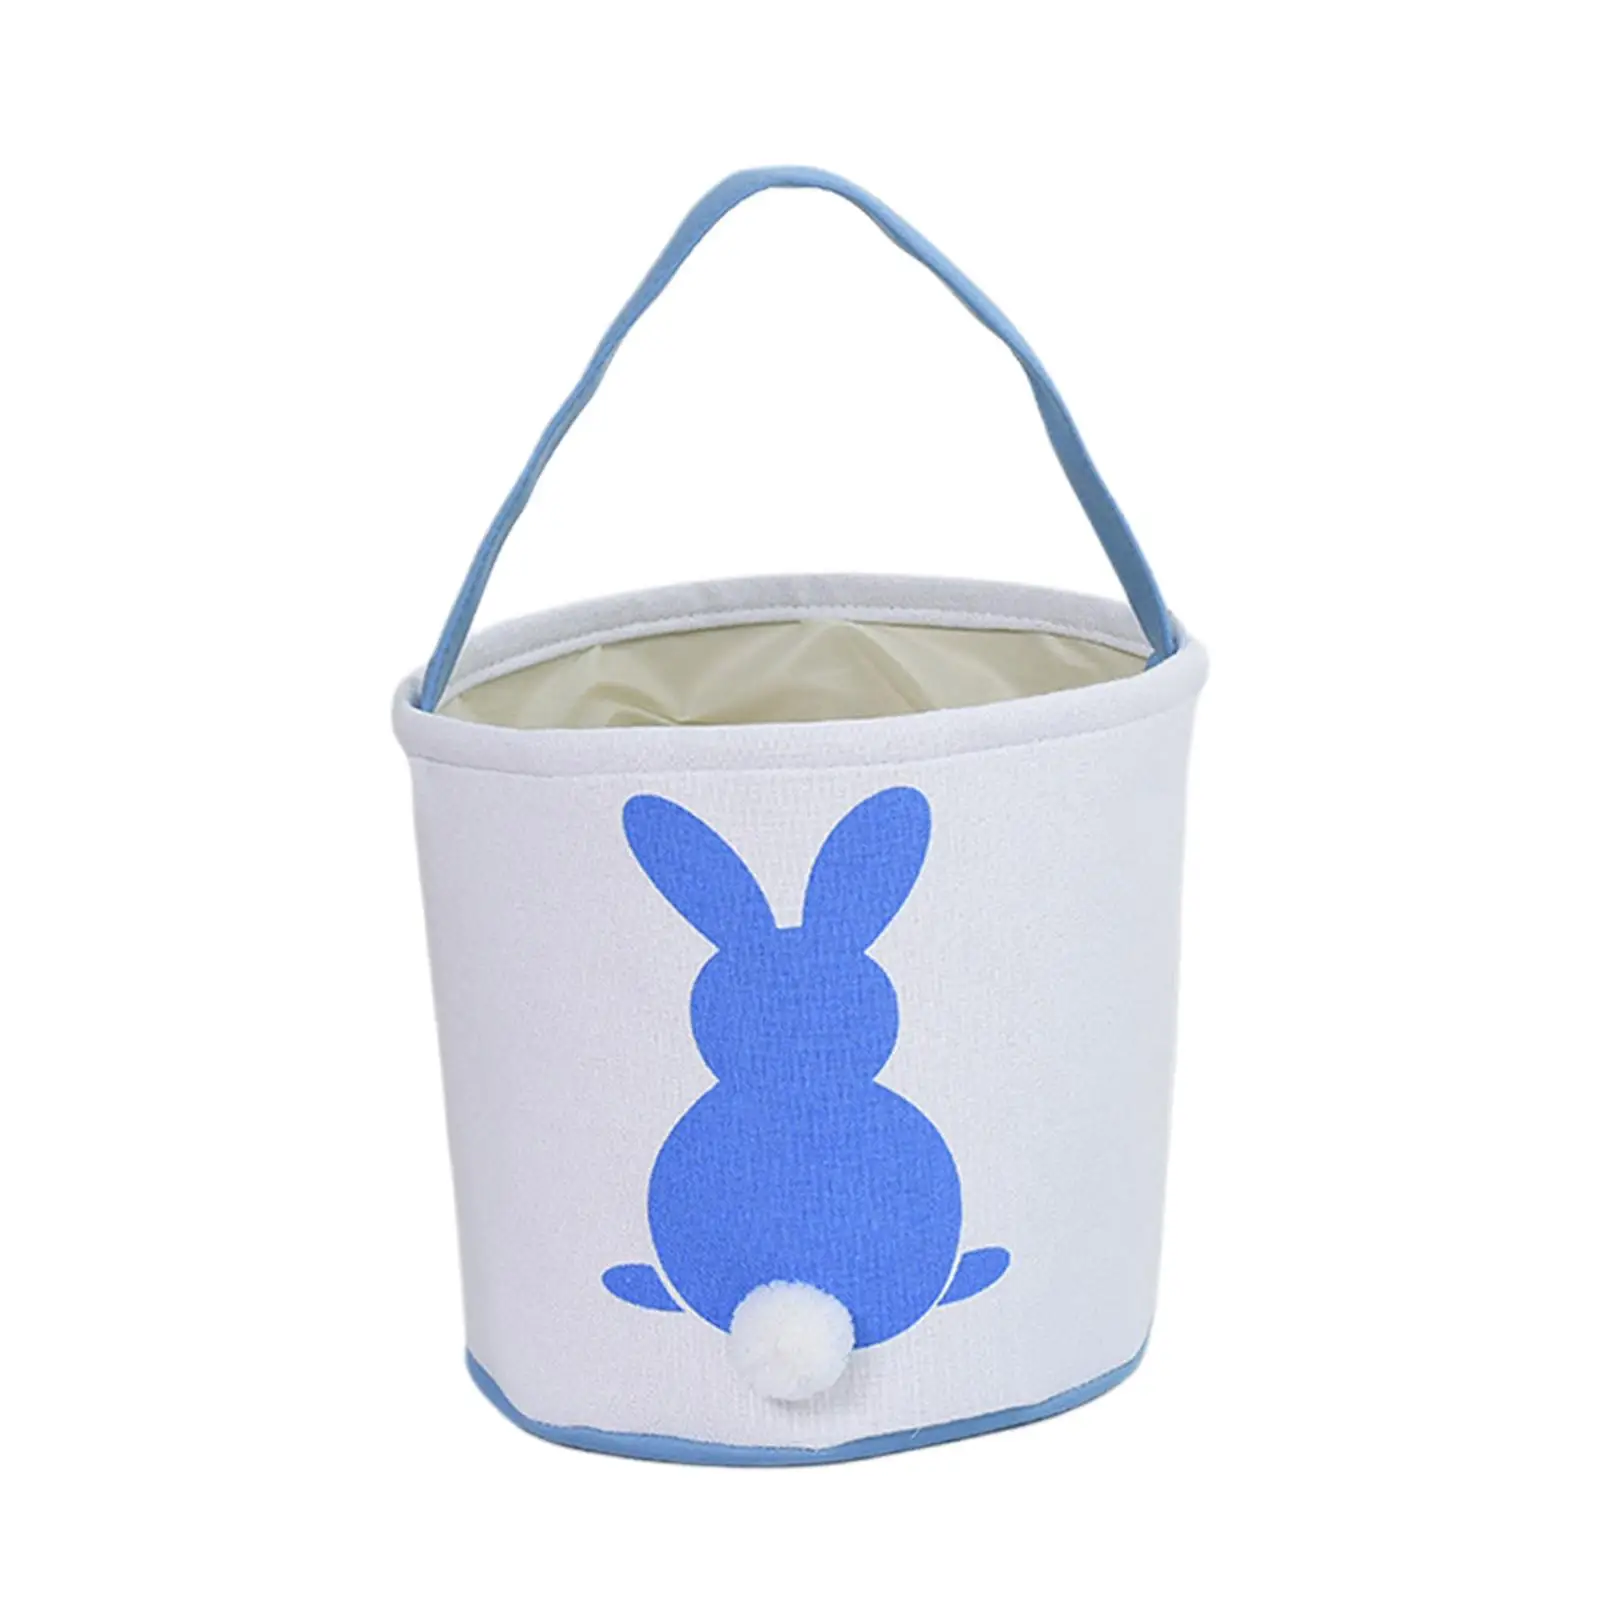 Lovely Easter Rabbit Buckets Storage Bag High Quality Personalized Tote Easter Bunny Basket for Children Holiday Party Decor